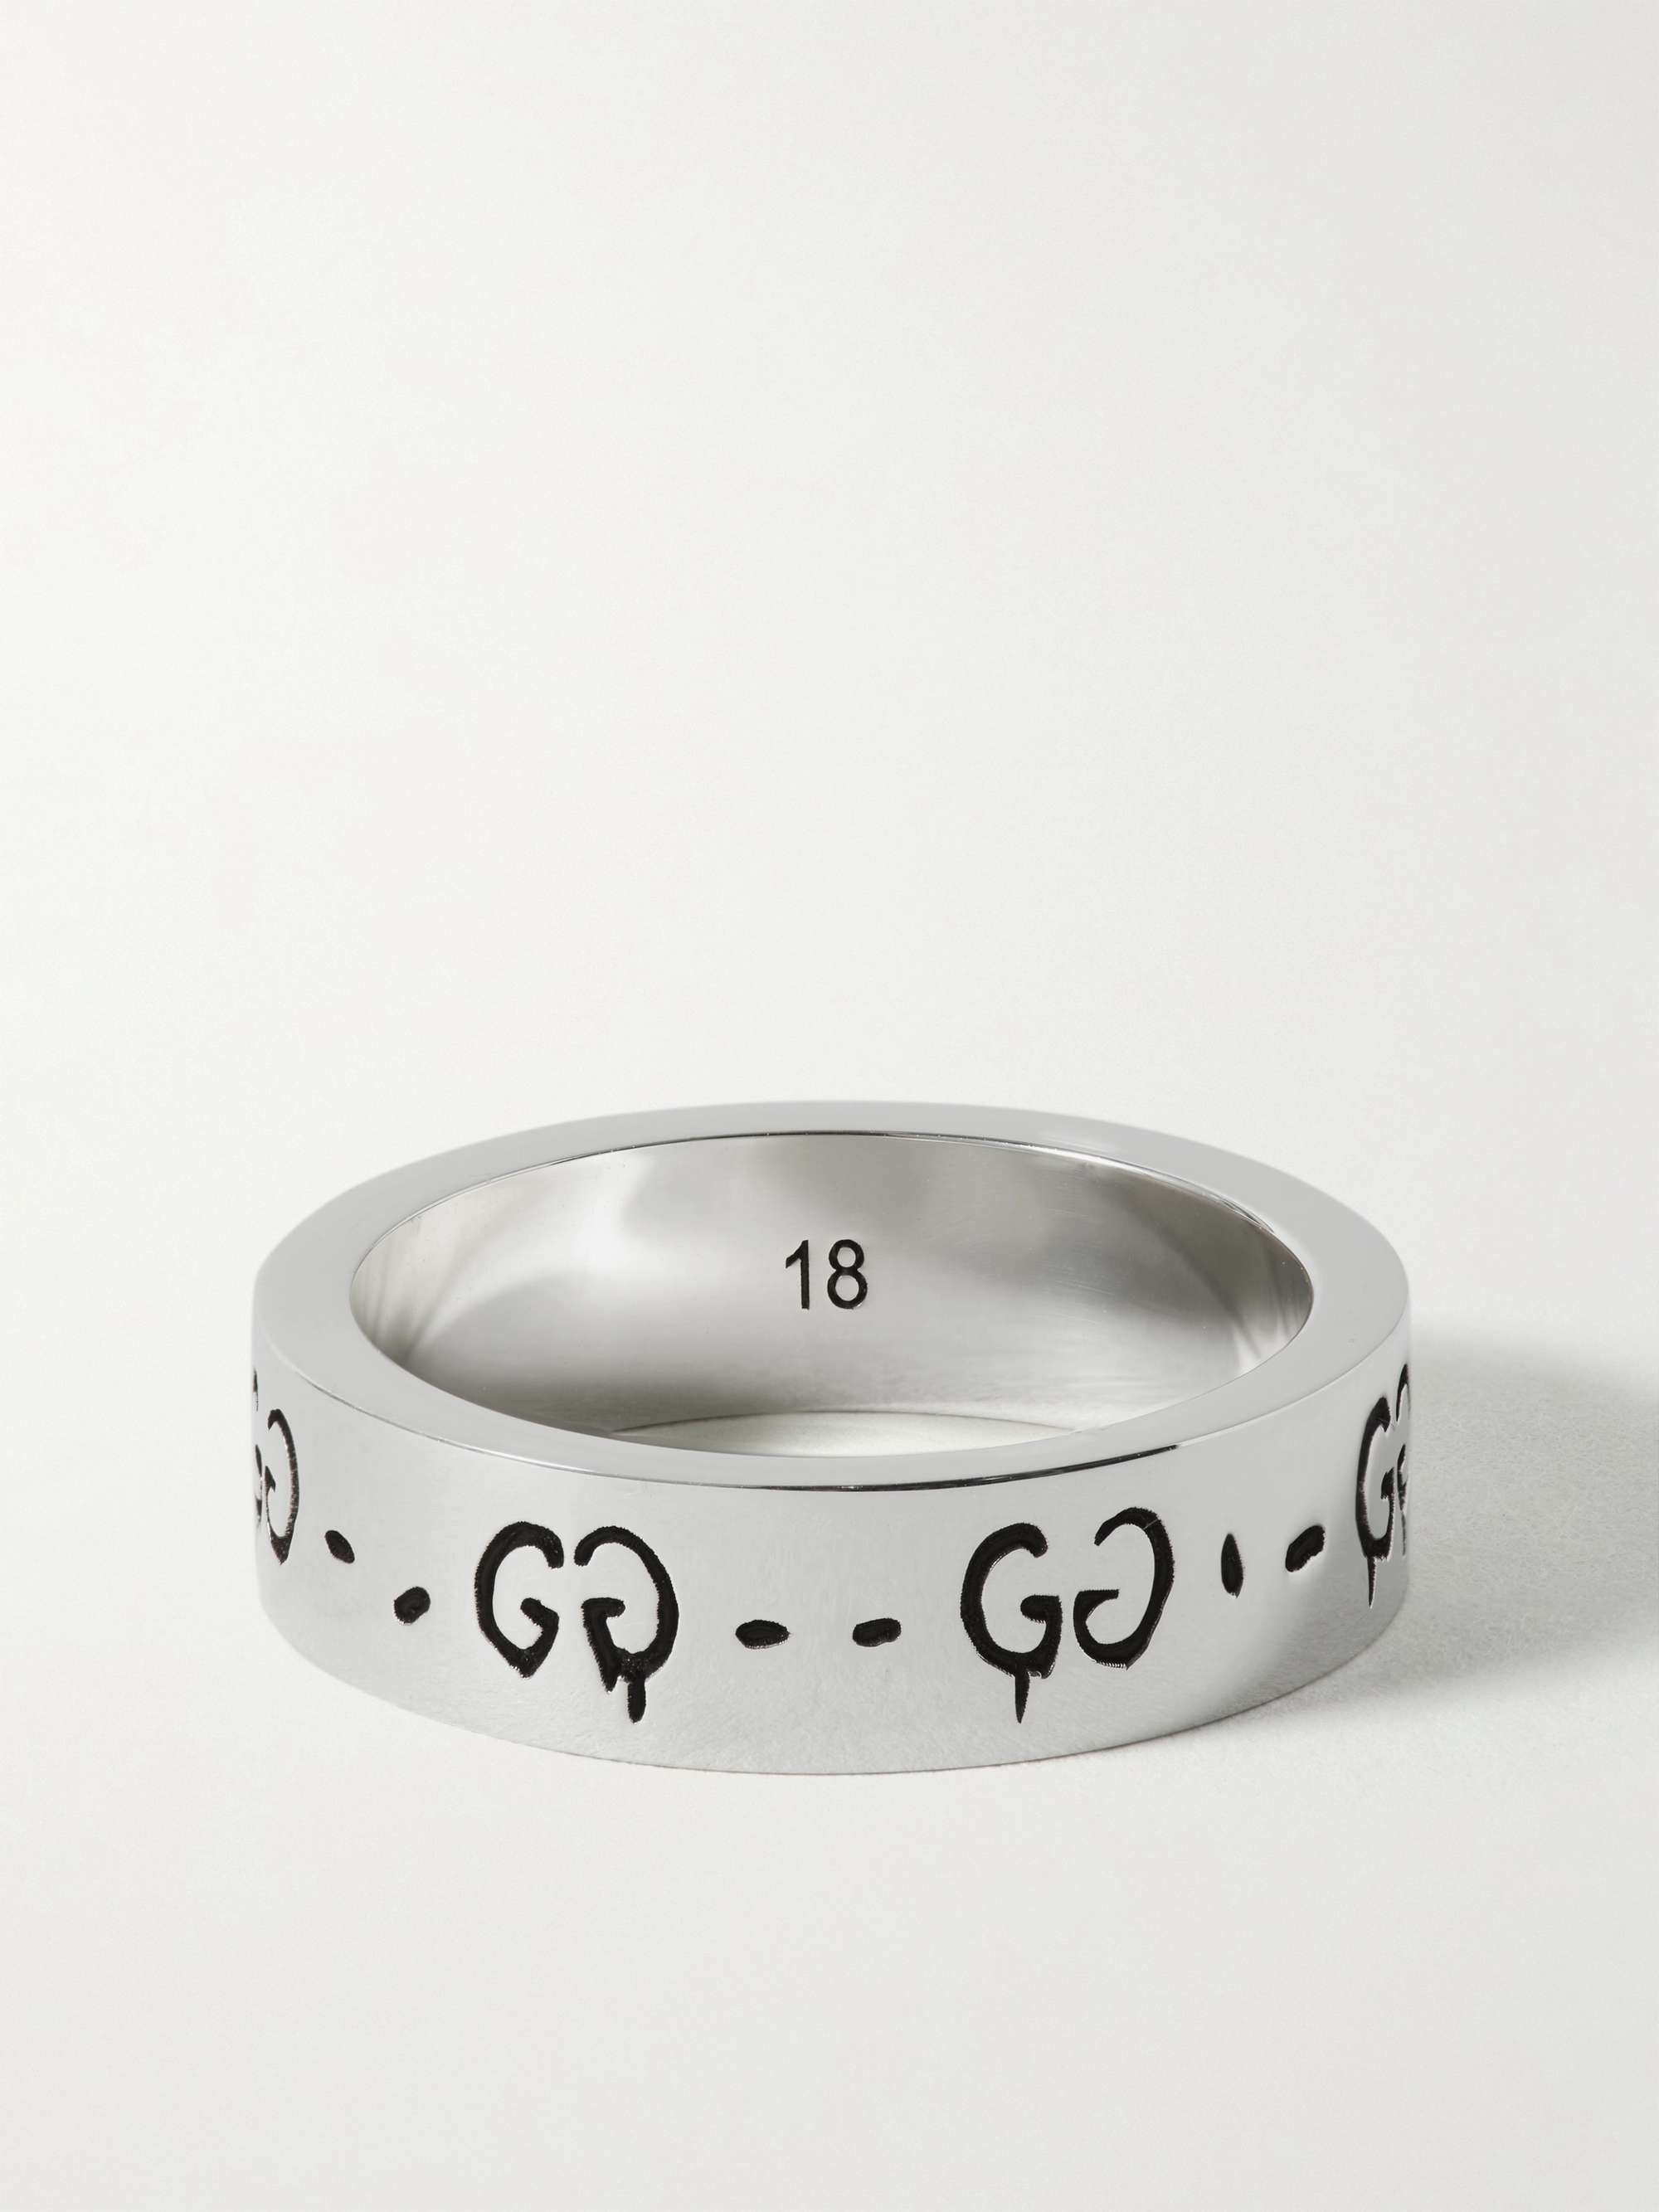 GUCCI Logo-Engraved Silver Ring